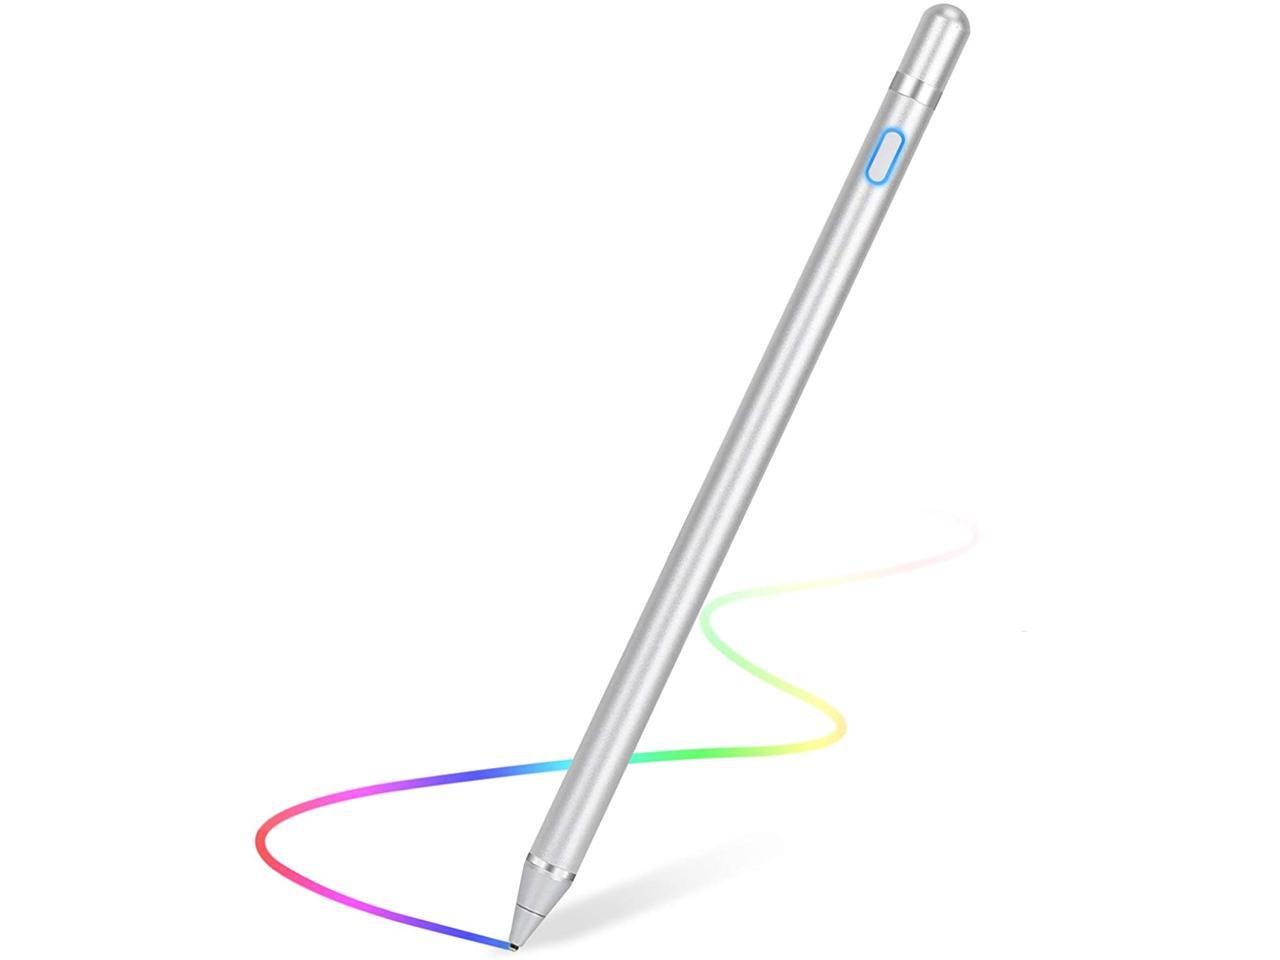 Stylus Pen for Touch Screens Active Digital Pencil 1.5mm Fine Tip Smart Pen Rechargeable Drawing Stylus Compatible with iPhone iPad Mini/Air Smartphones & Tablets by BAGEYI White